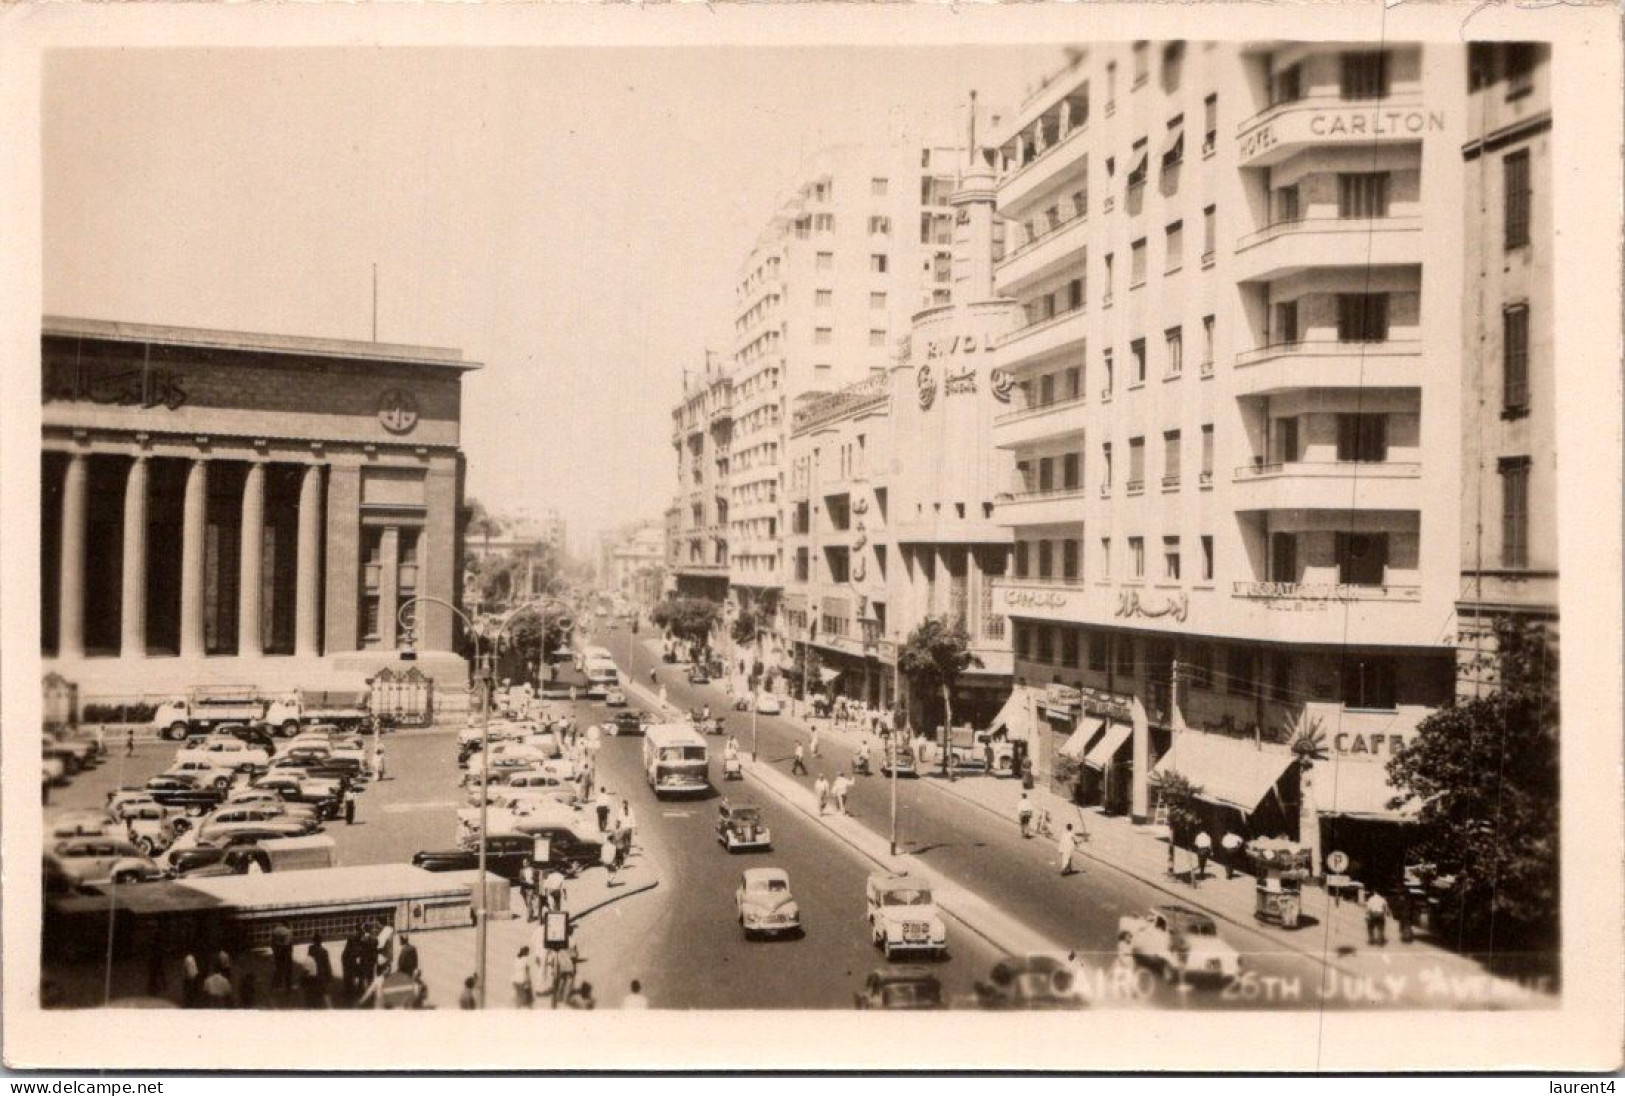 18-5-2024 (5 Z 28) Egypt (b/w Very Old) Cairo 26th July Street - Le Caire